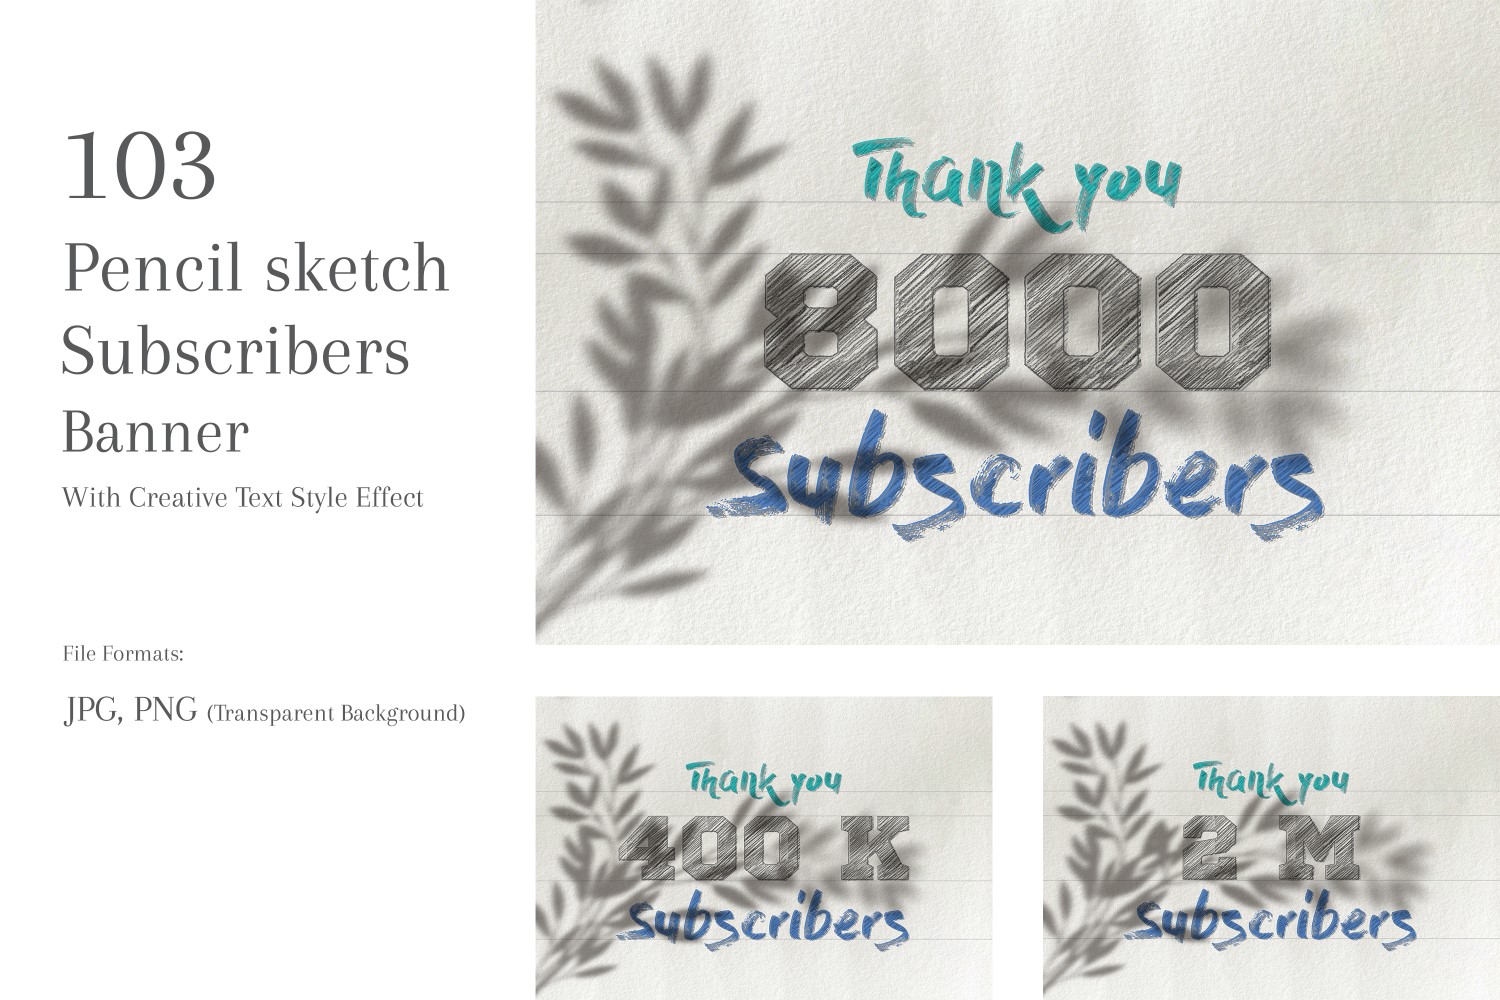 Pencil sketch Subscribers Banners Design Set 69